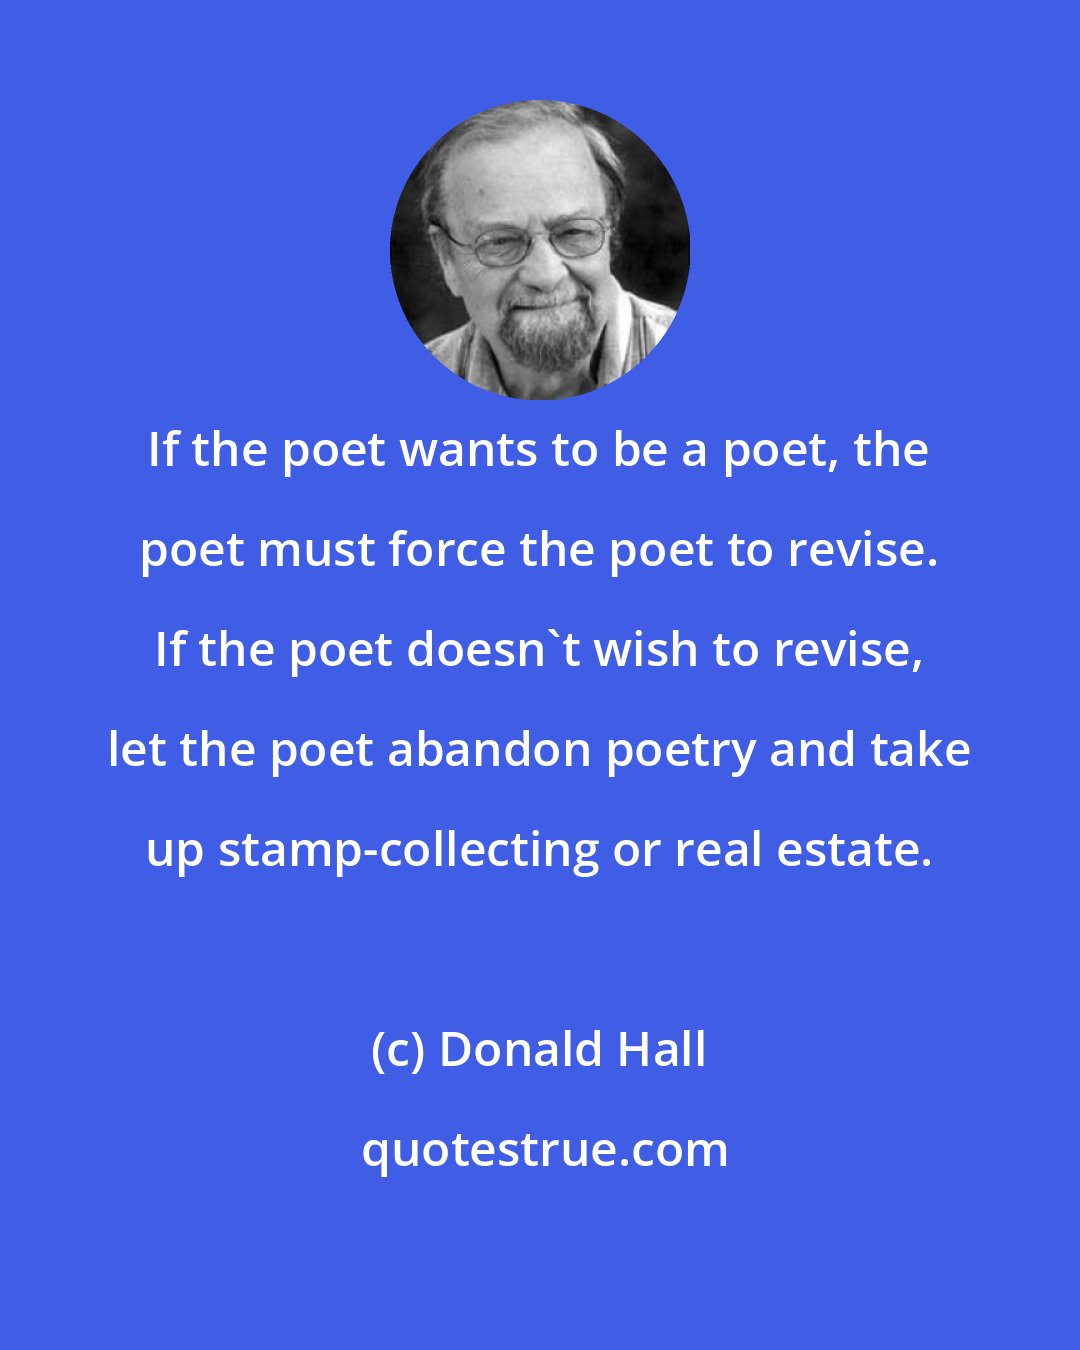 Donald Hall: If the poet wants to be a poet, the poet must force the poet to revise. If the poet doesn't wish to revise, let the poet abandon poetry and take up stamp-collecting or real estate.